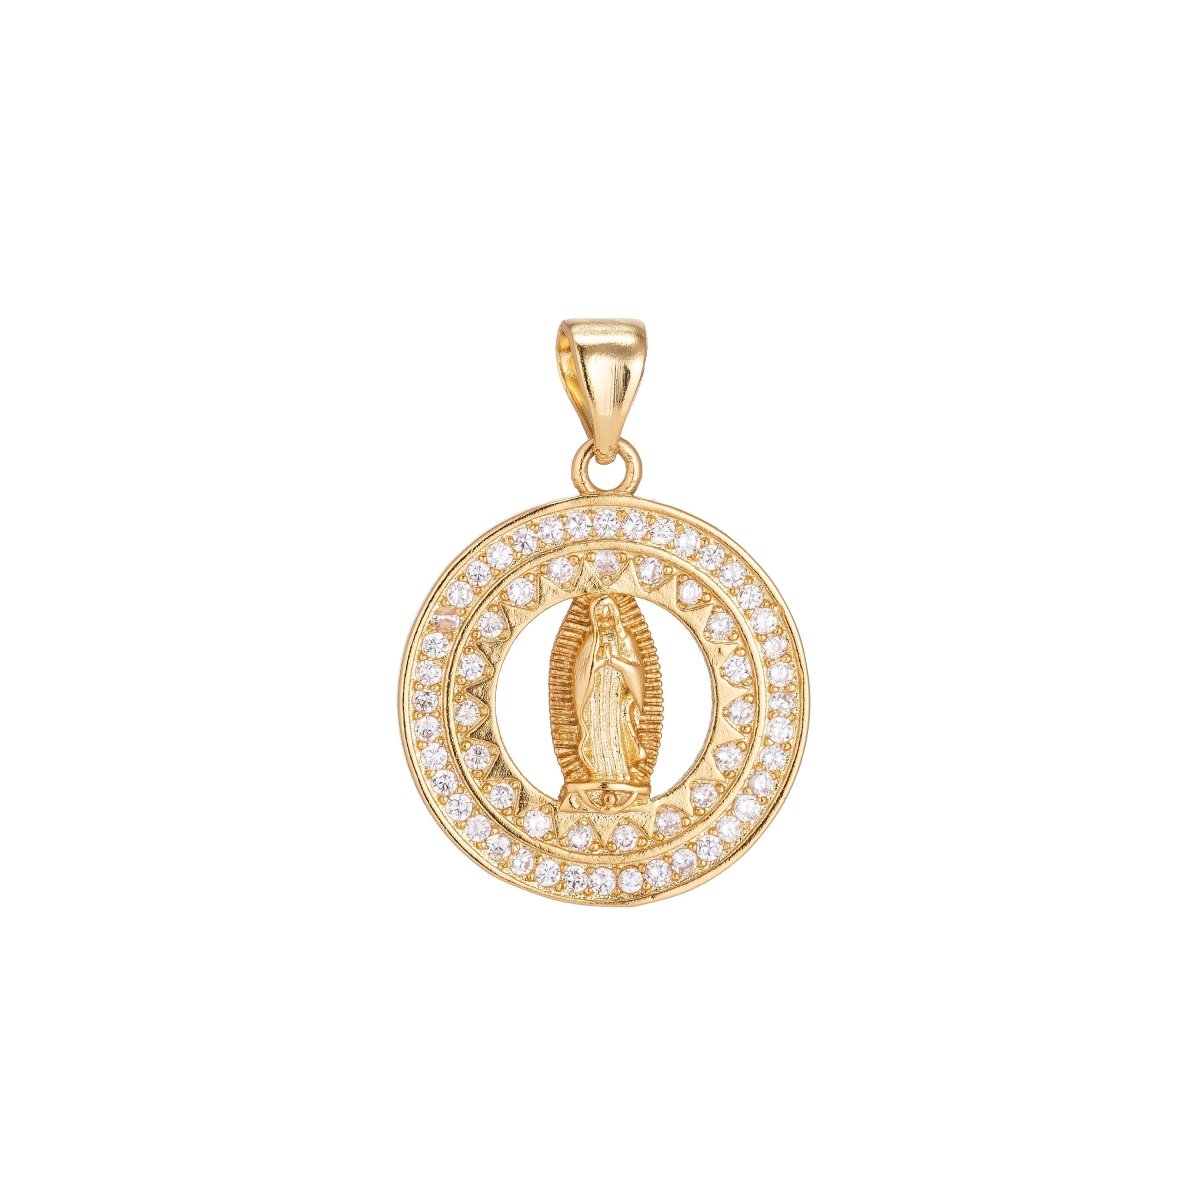 Dainty 18k Gold Fill Virgin Mary Sparkling CZ Micro Pave Pendant With Bail for Layer Necklace Jewelry Making Religious Charm H-261 - DLUXCA